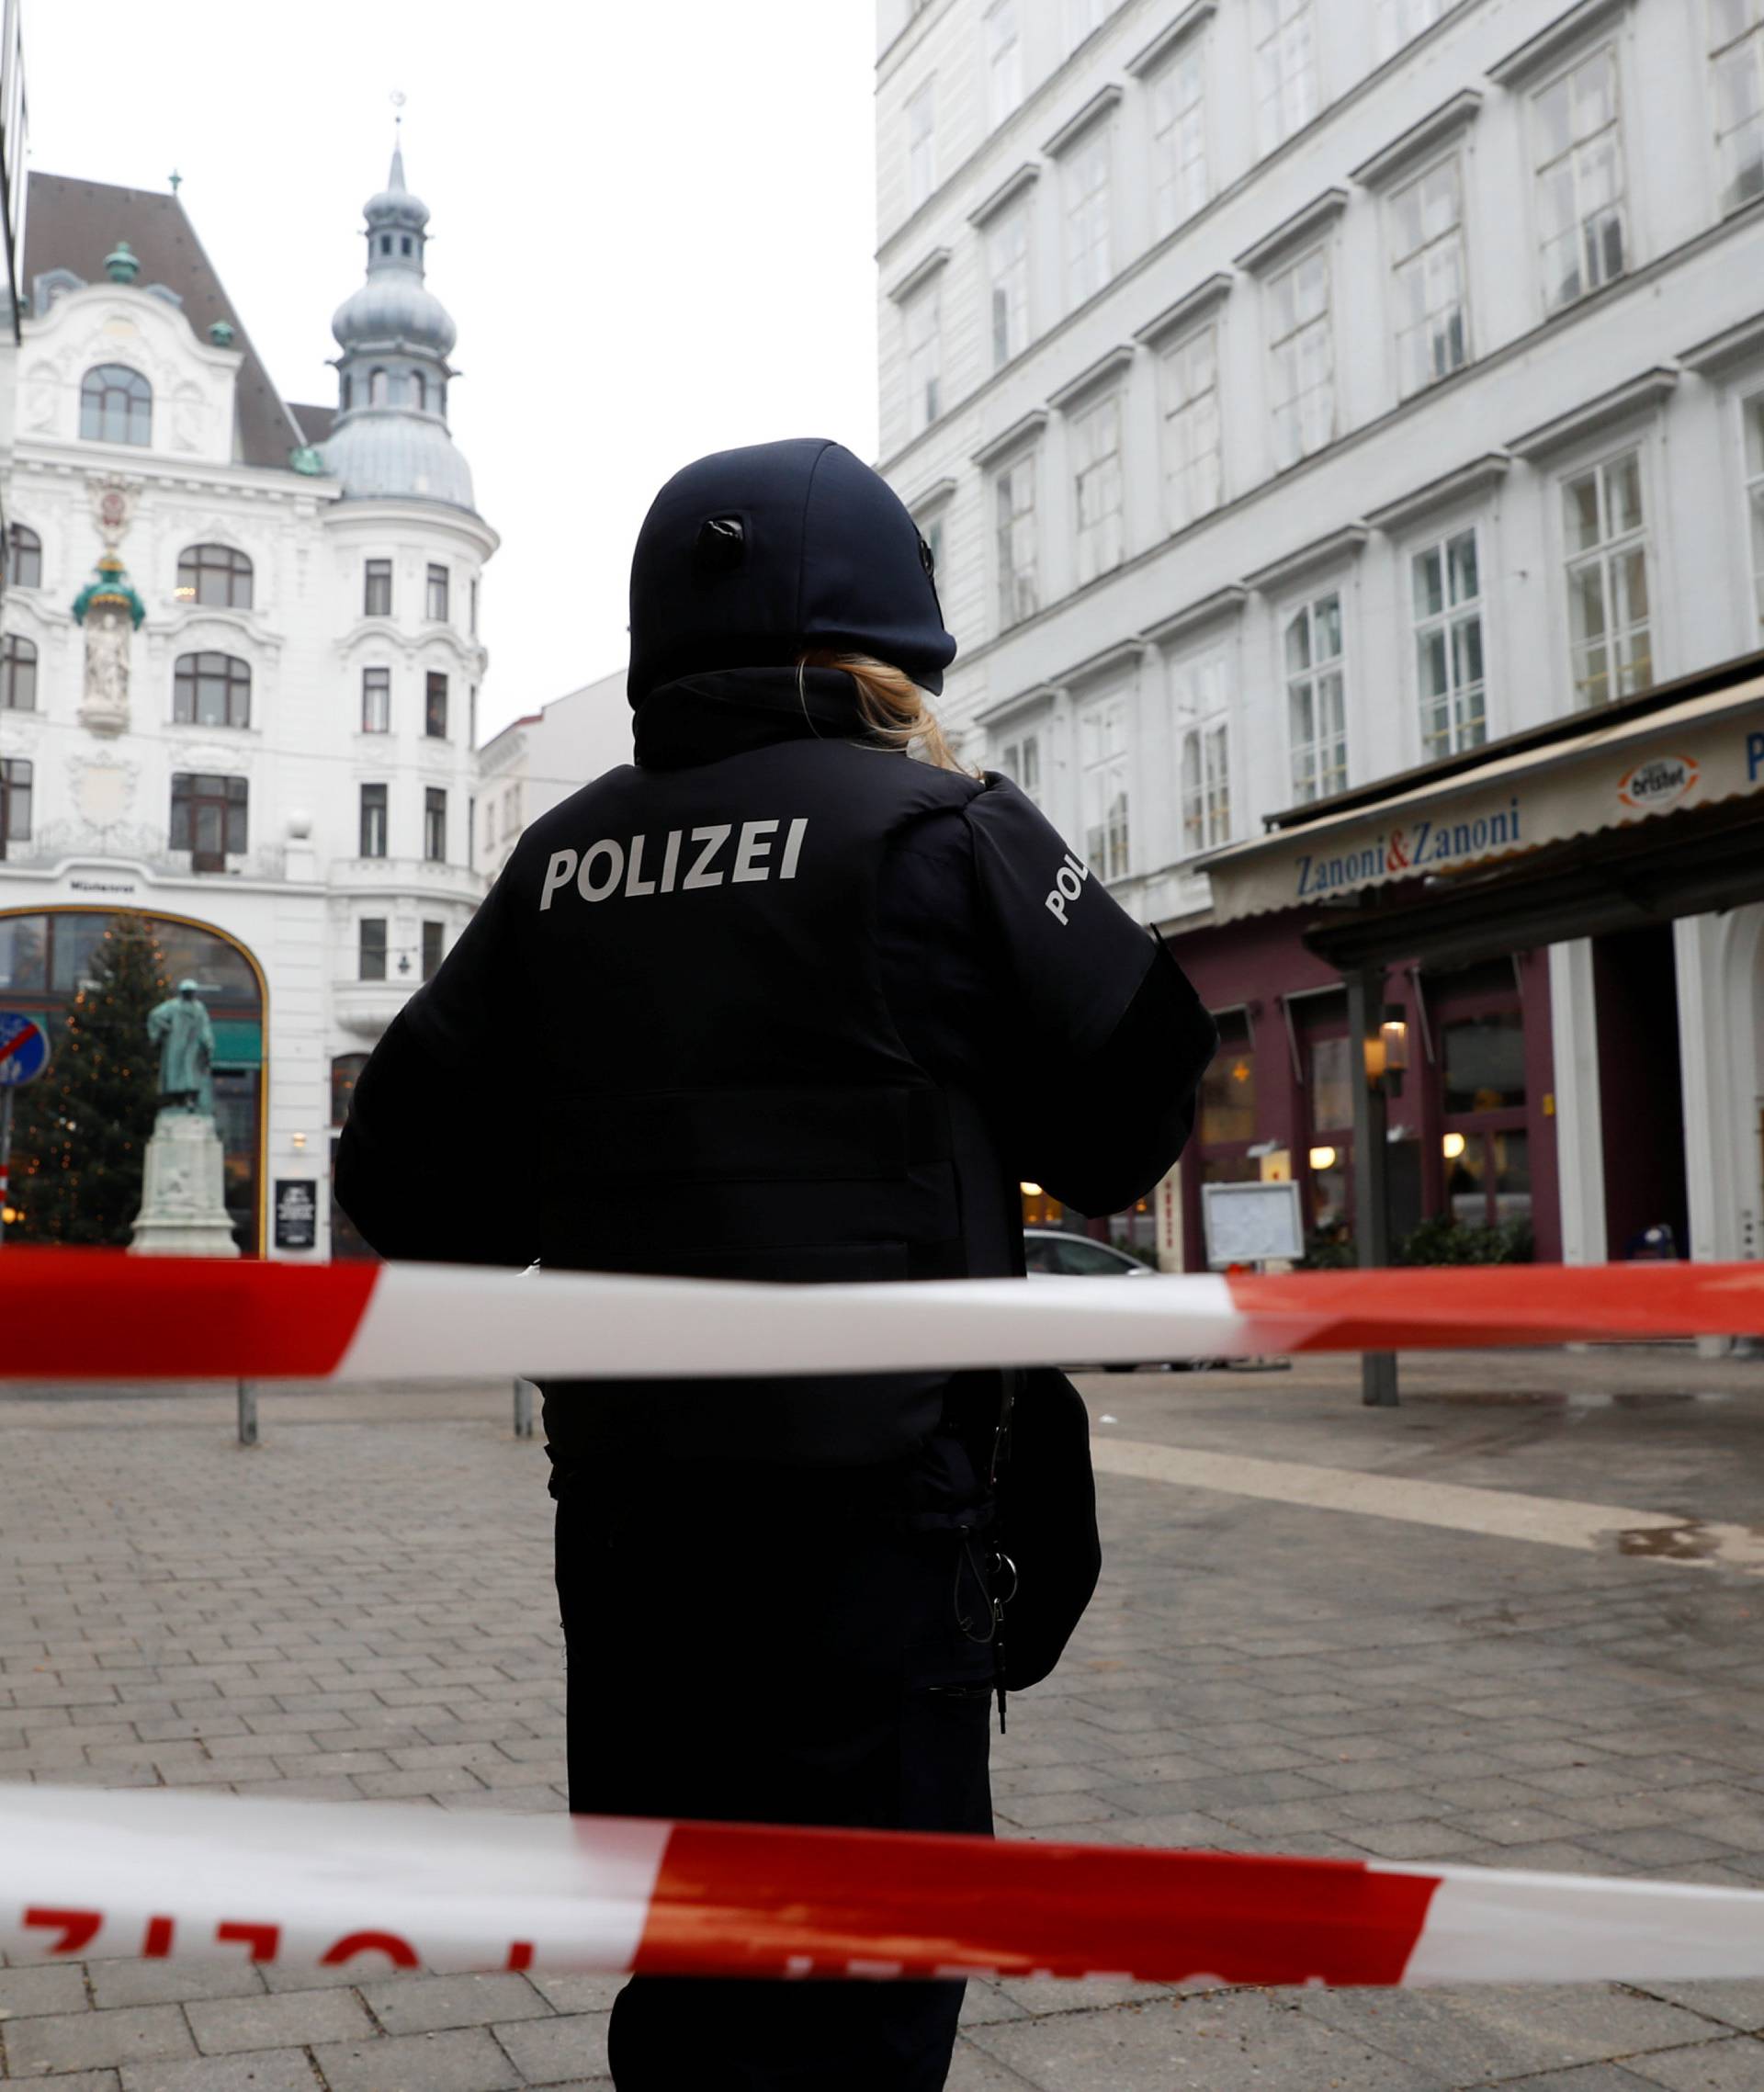 Police secure the area after shots were fired in a restaurant in Vienna